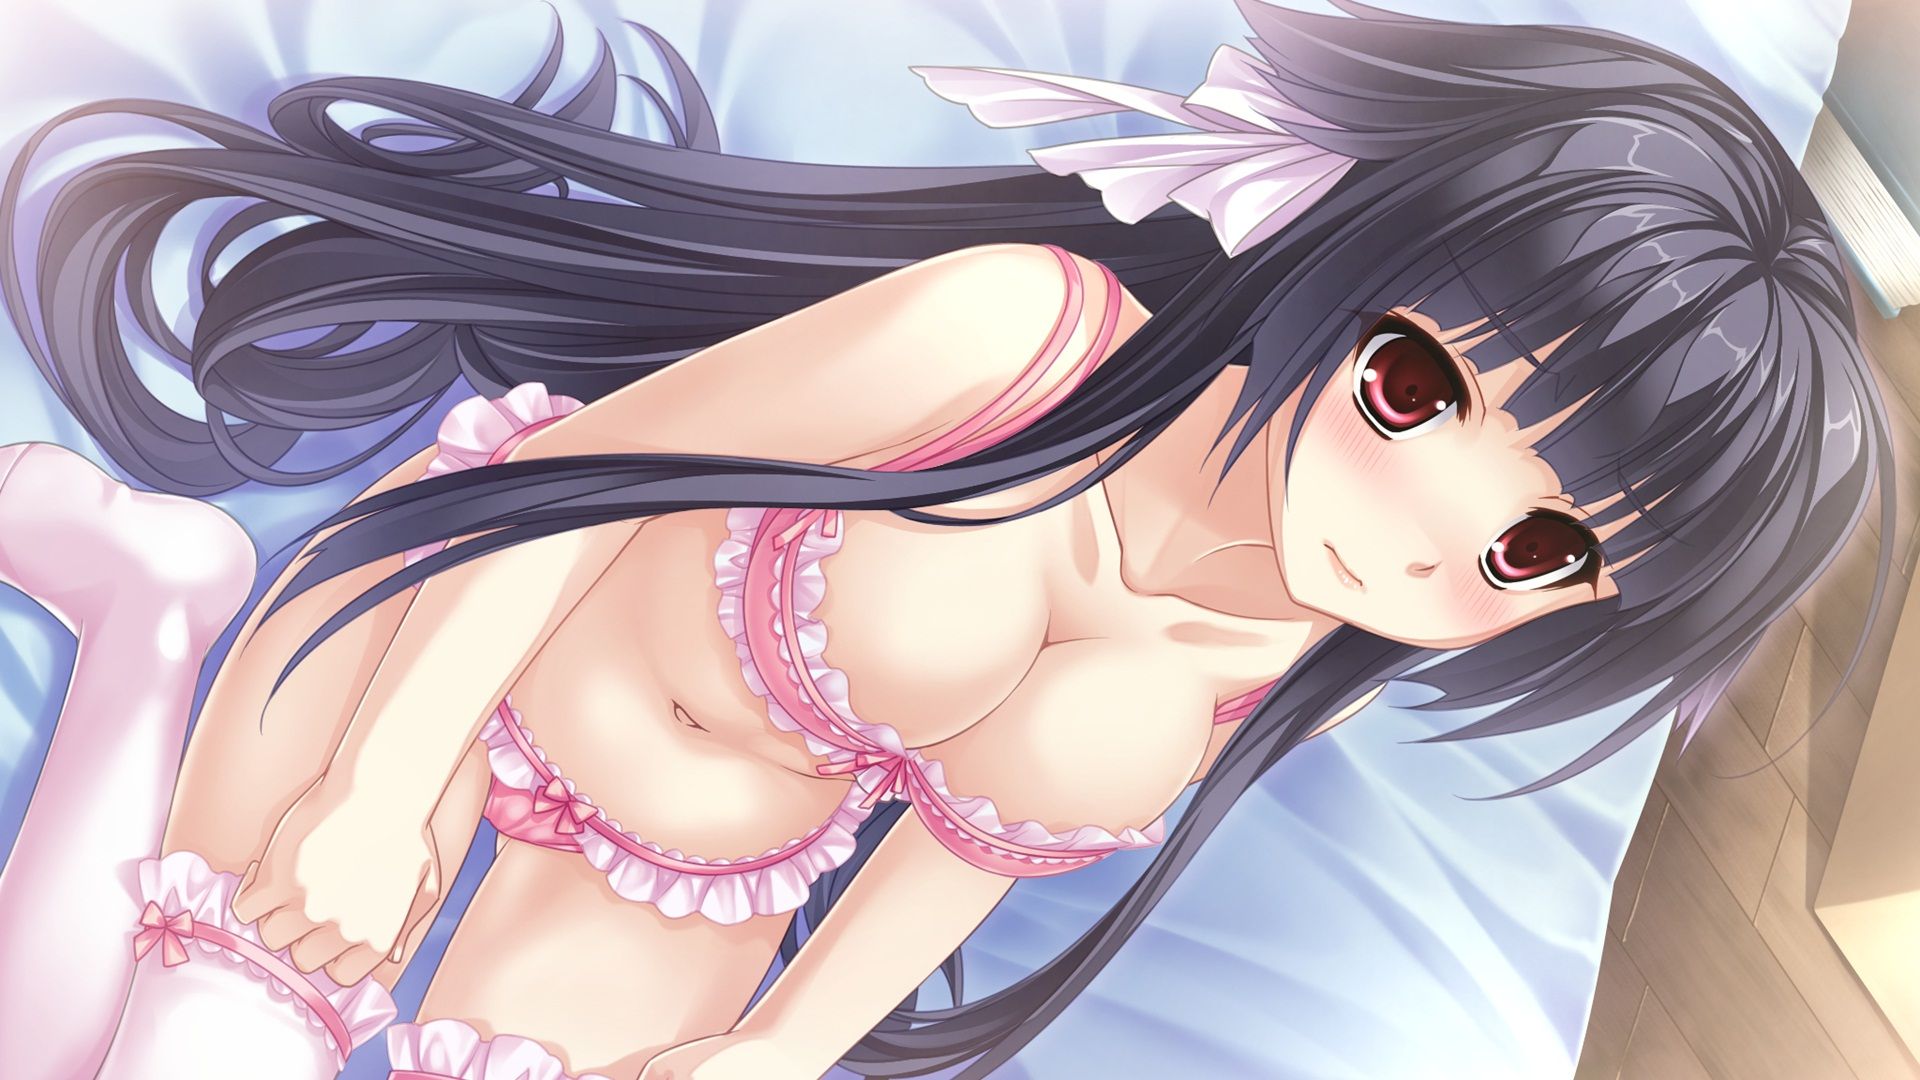 99 extravaganza [18 PC Bishoujo game CG] erotic wallpapers and pictures part 1 7